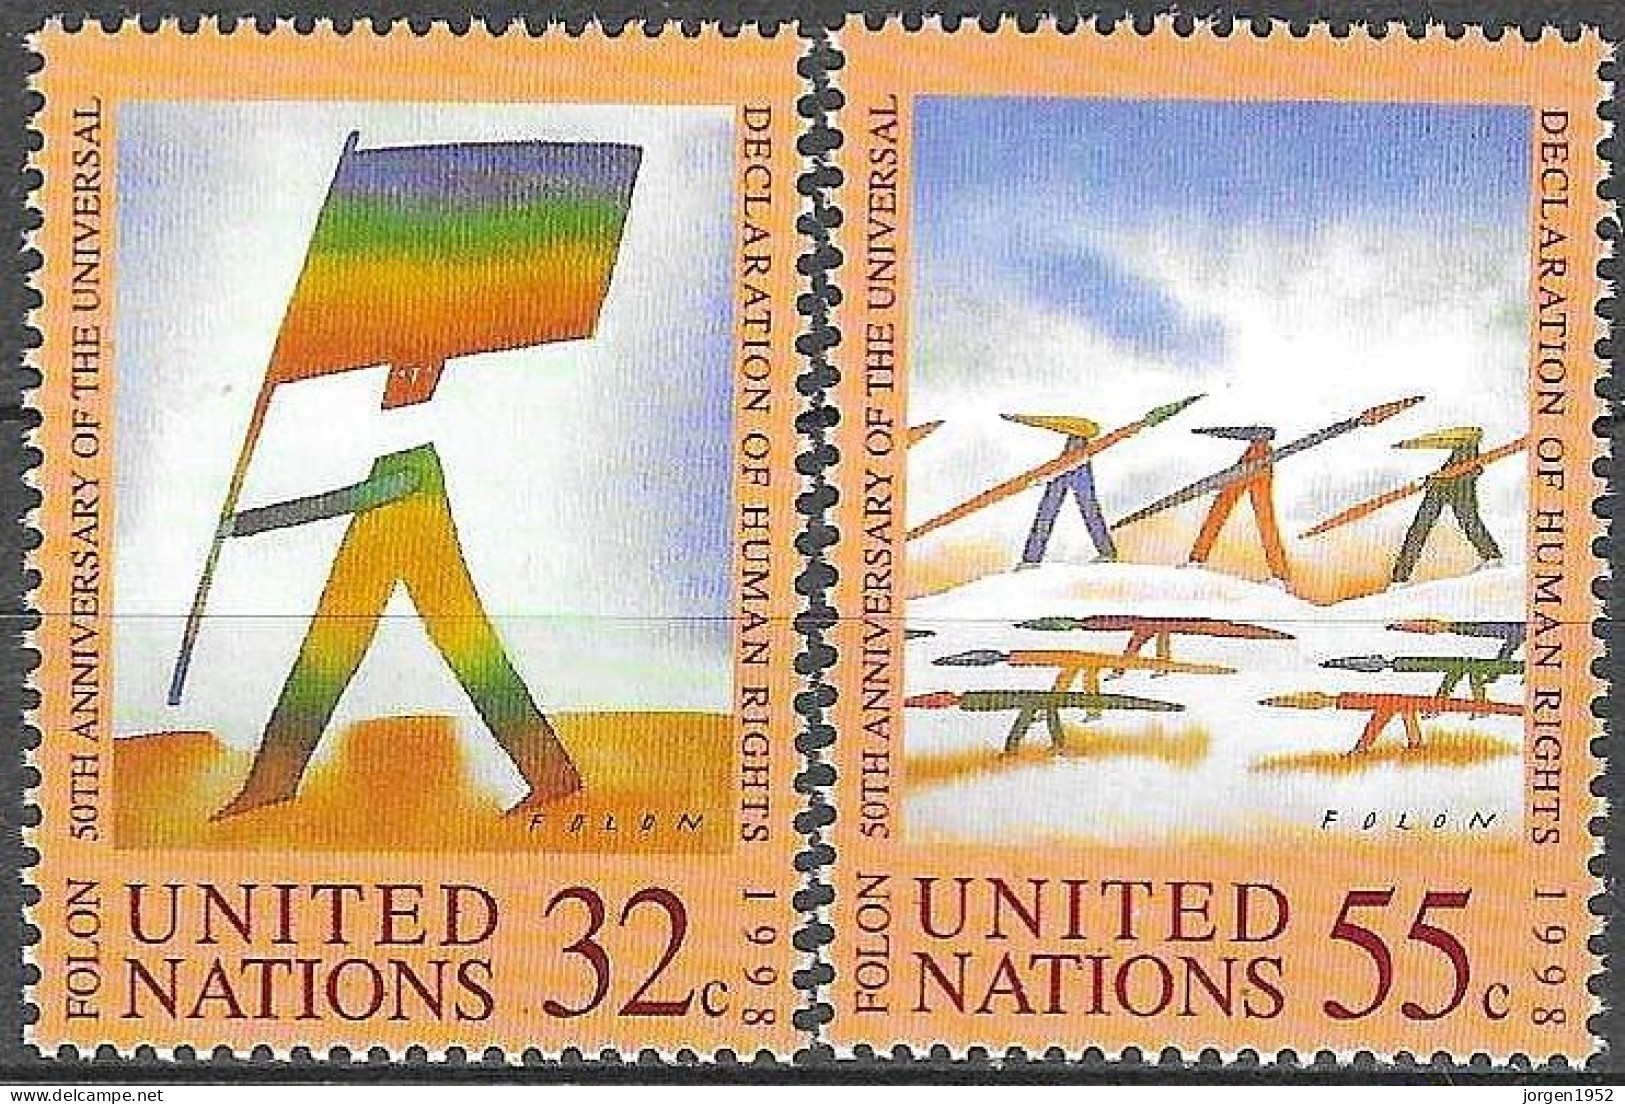 UNITED NATIONS # NEW YORK FROM 1998 STAMPWORLD 787-88** - Nuevos